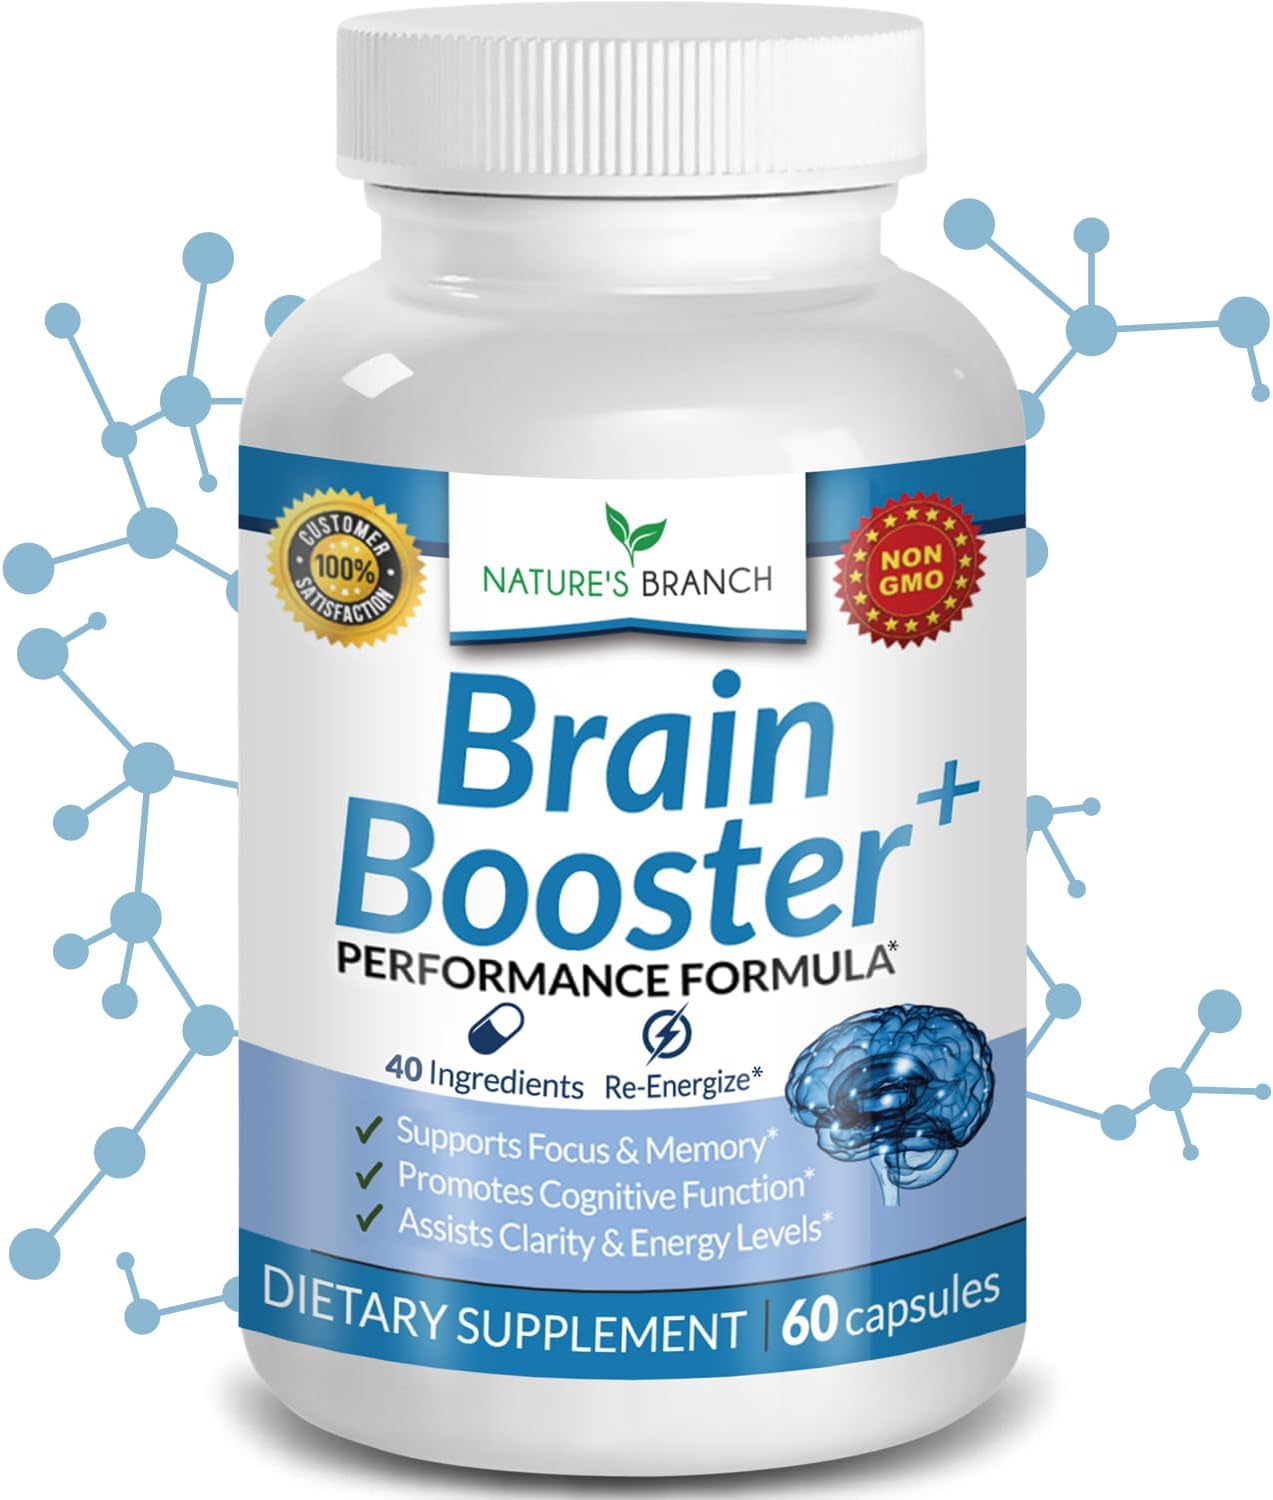 40-in-1 Brain Booster Supplement For Focus, Memory, Clarity, Energy | Advanced Vitamins Plus eBook | For Men & Women, Cognitive Function Nootropic Support with DMAE, Brain Health Formula | 60 Capsules